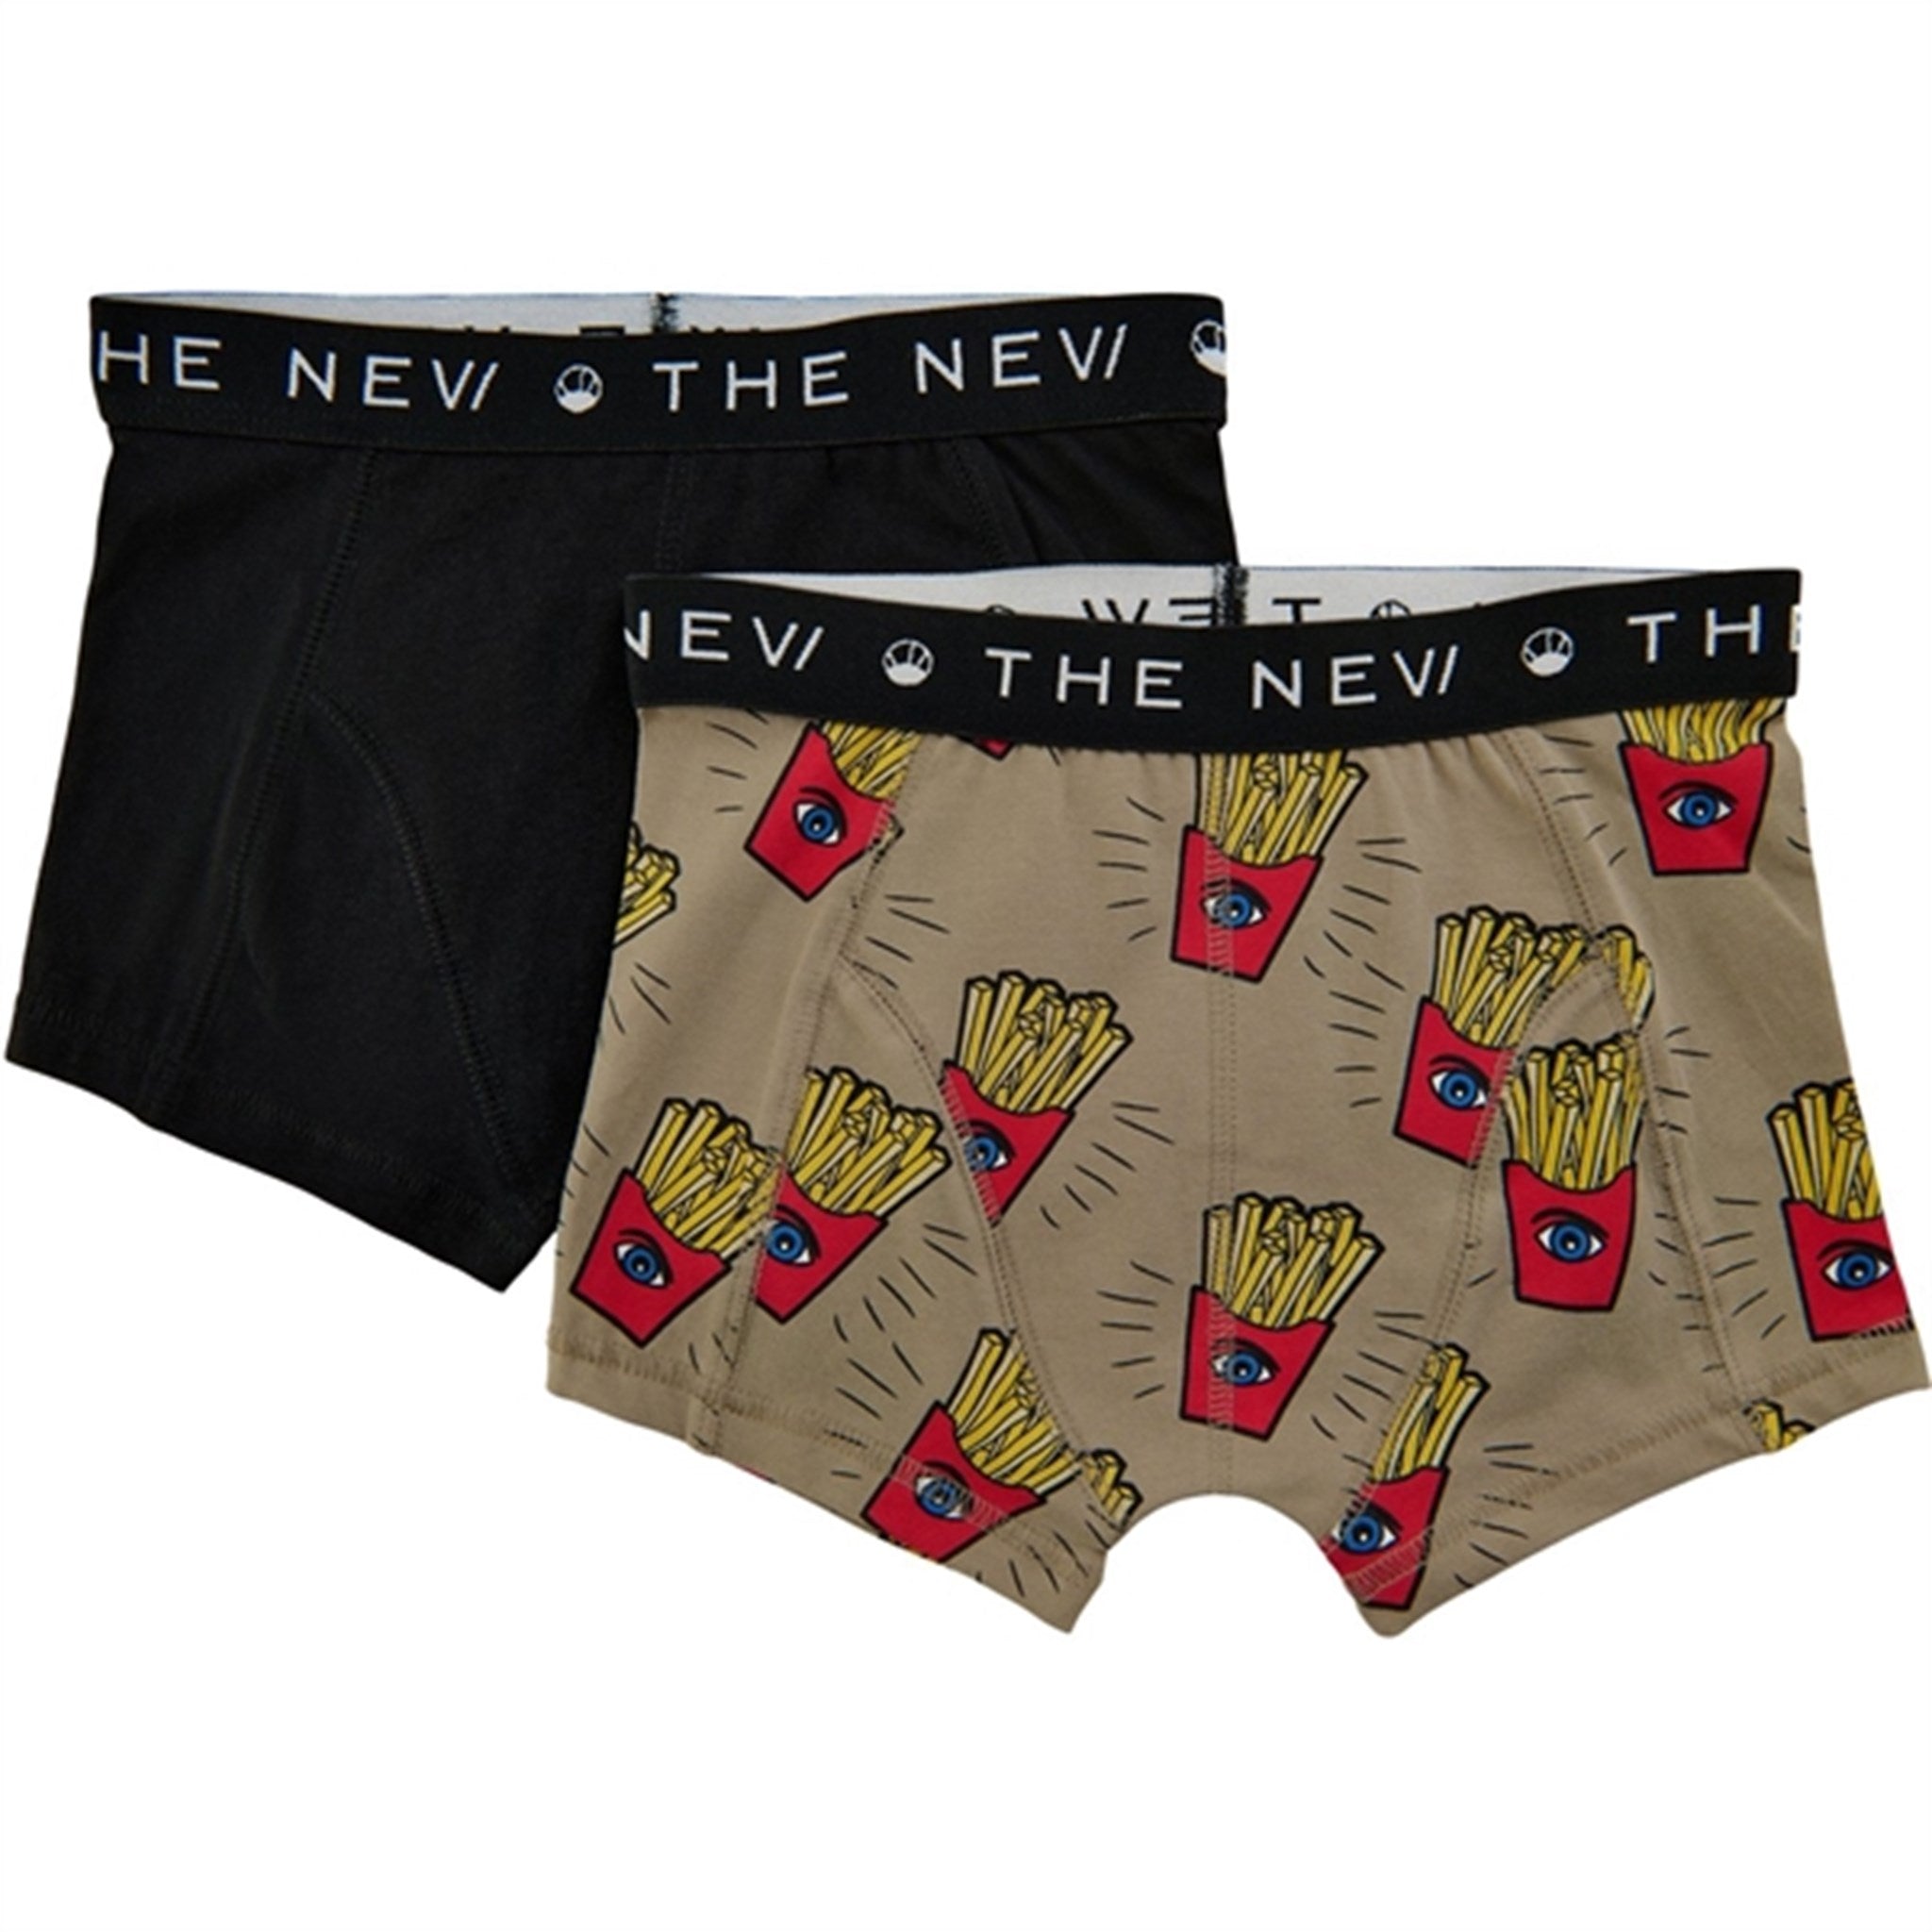 THE NEW Greige Boxers 2-pakke